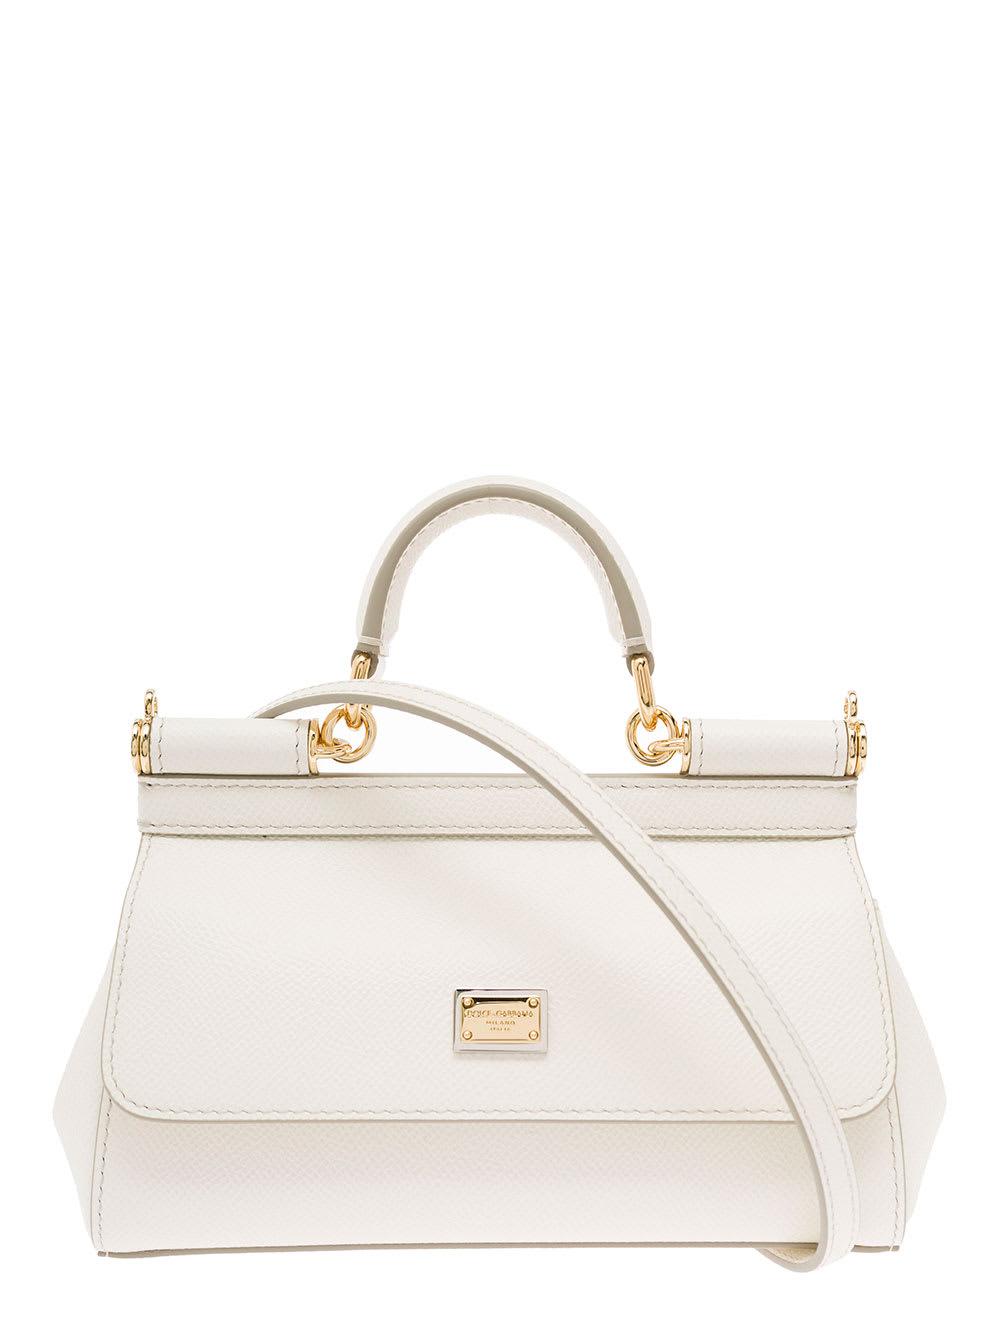 Dolce & Gabbana Sicily Small Grained-leather Handbag in Natural